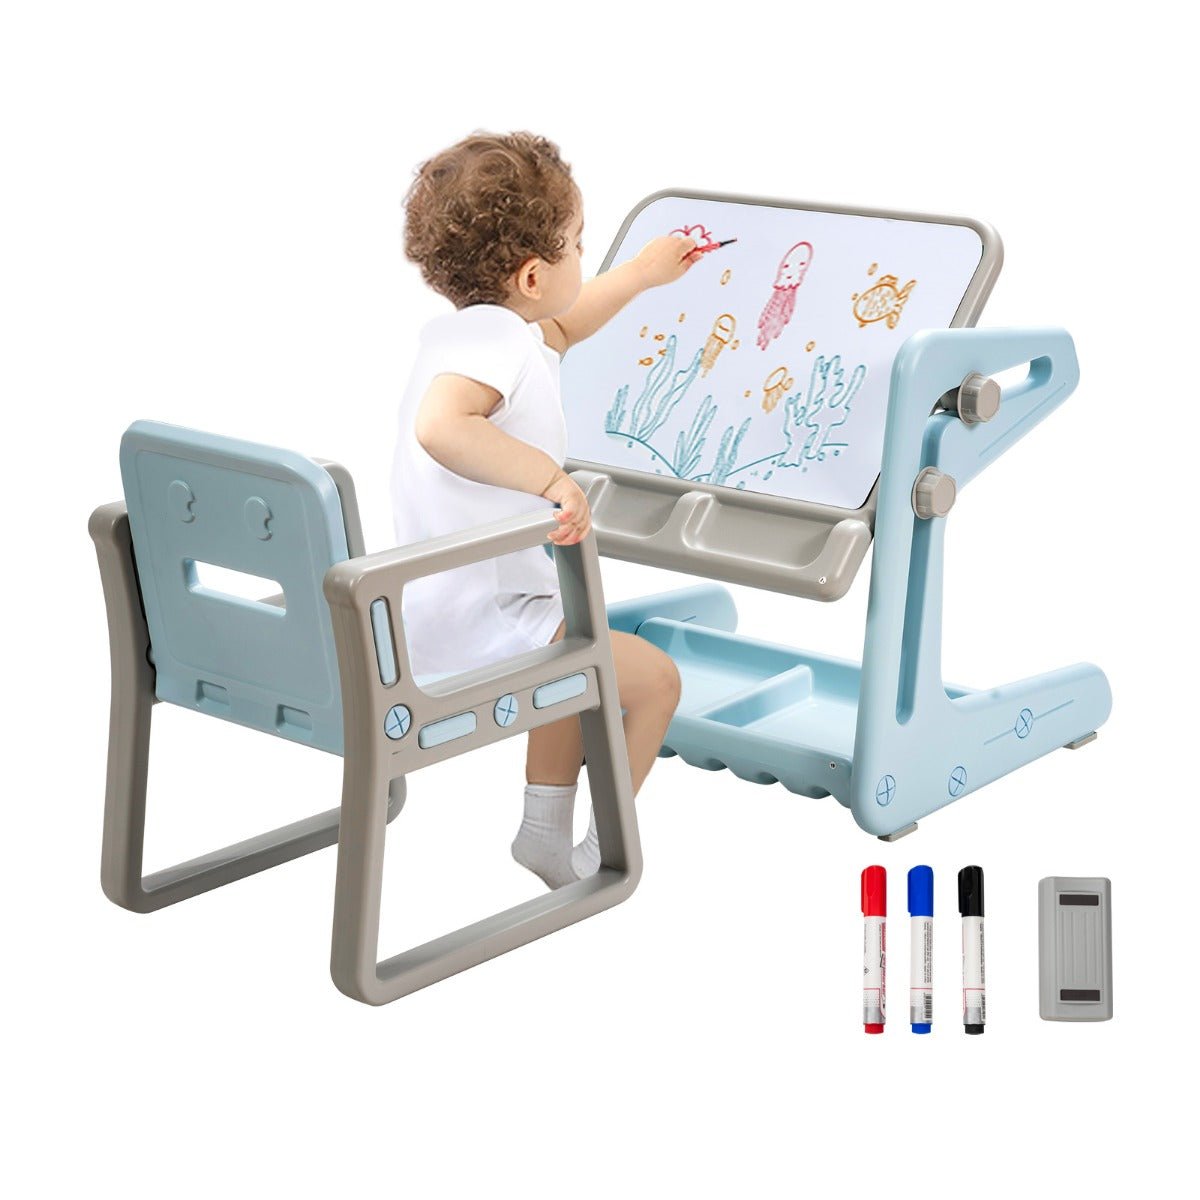 Art Table for Children - Generous Storage to Inspire Artistic Dreams